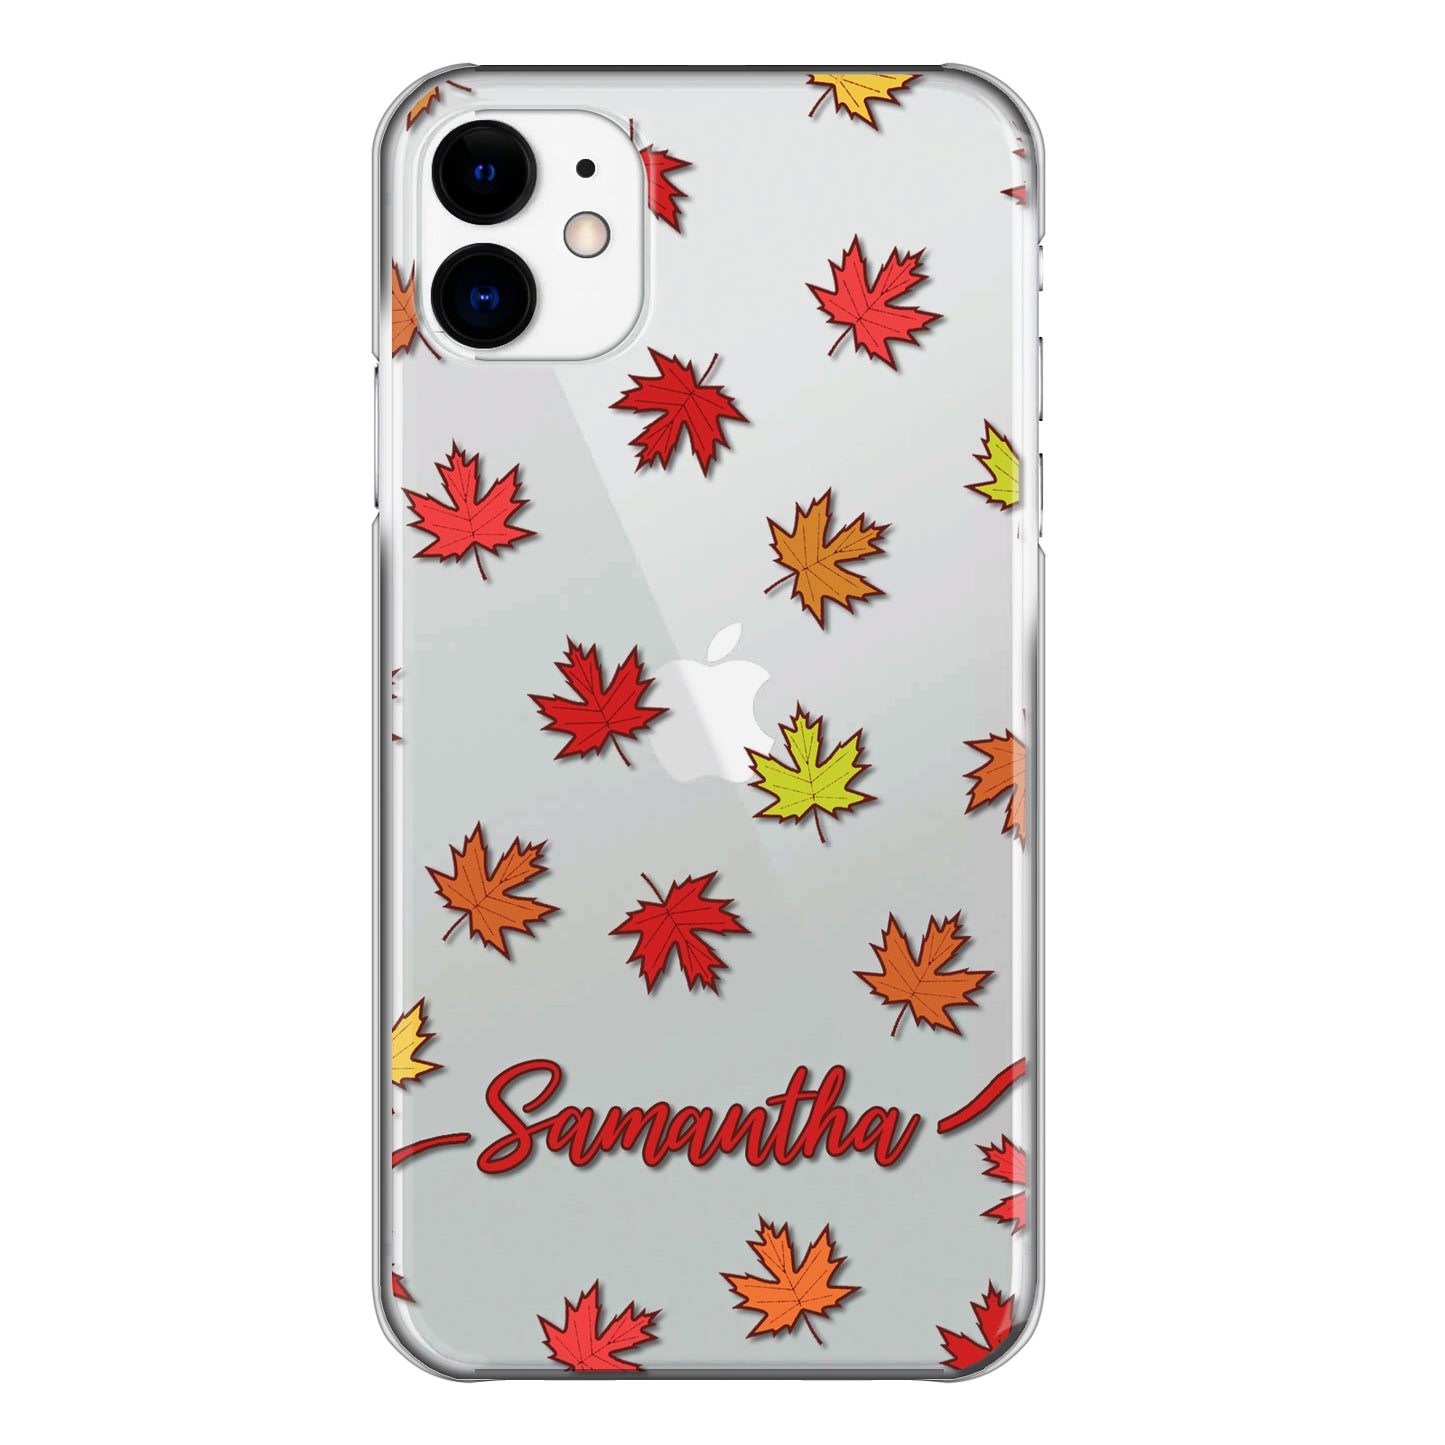 Personalised Oppo Phone Hard Case with Autumn Leaves and Stylish Red Text